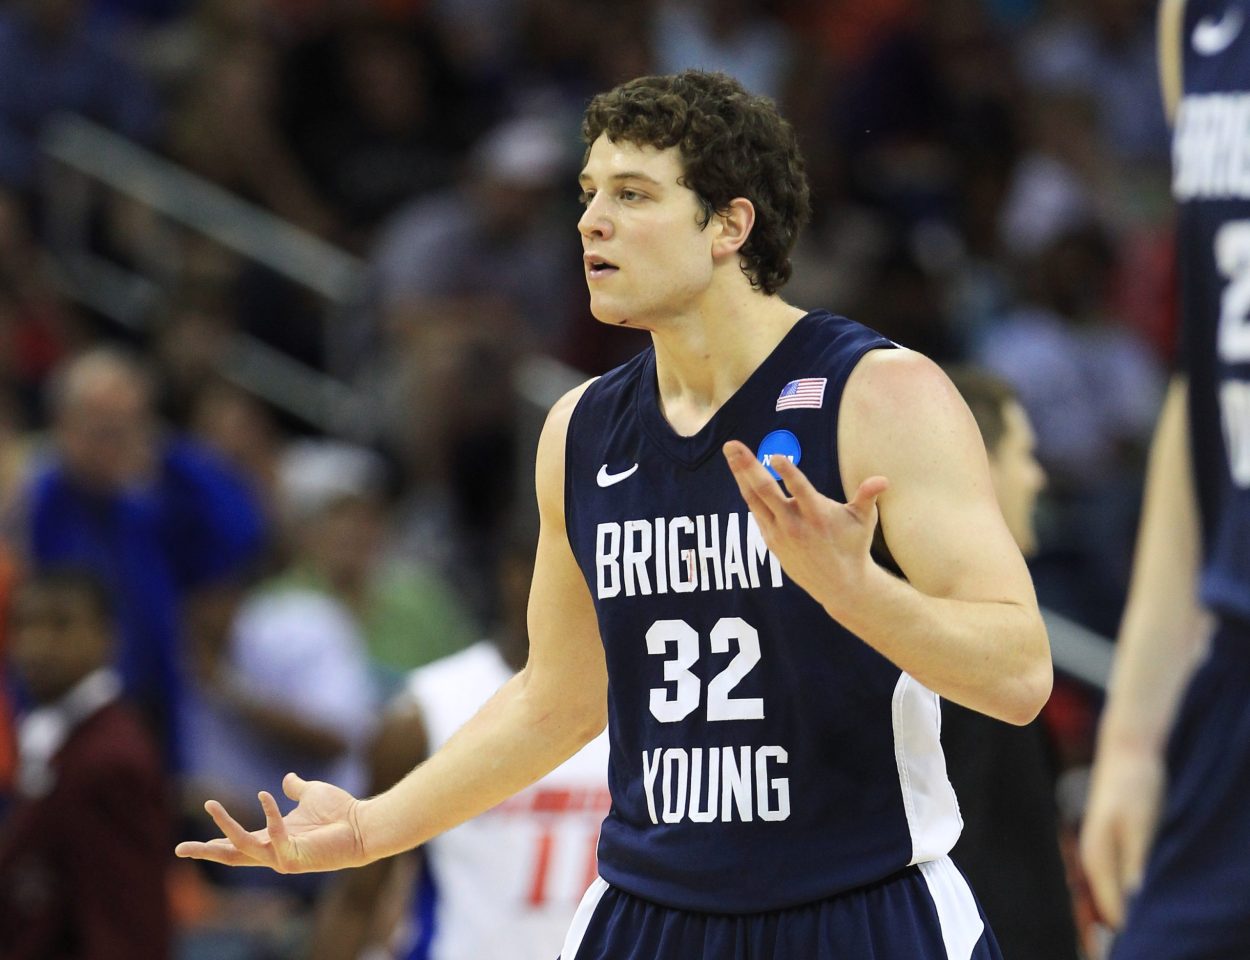 Former BYU Cougars star and 2011 NBA draft pick Jimmer Fredette reacts during an NCAA Tournament game